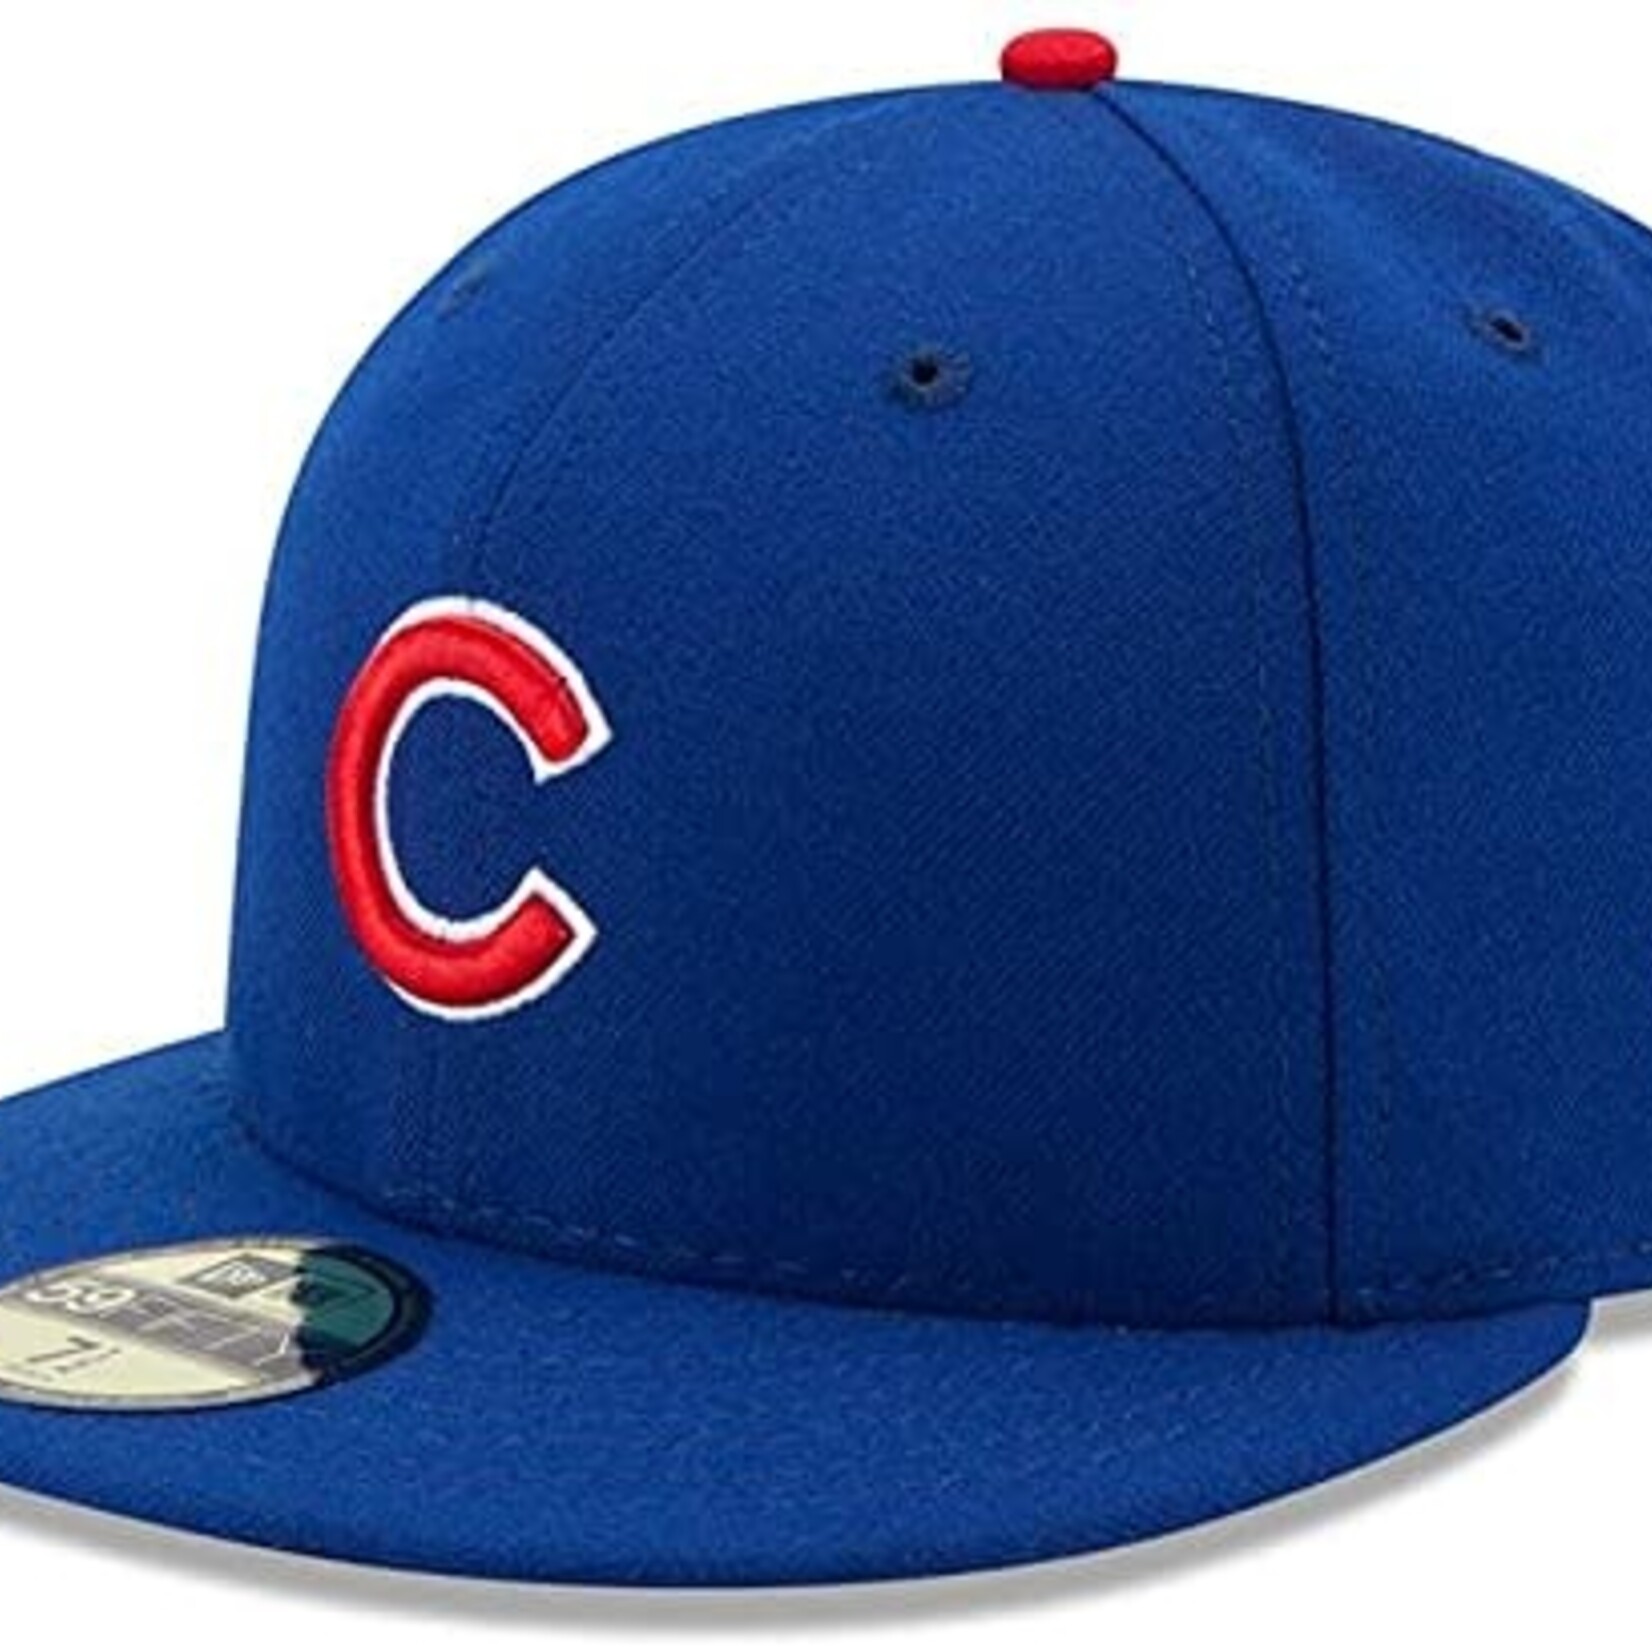 New Era New Era Hat, 5950 On-Field AC, MLB, Chicago Cubs, Game